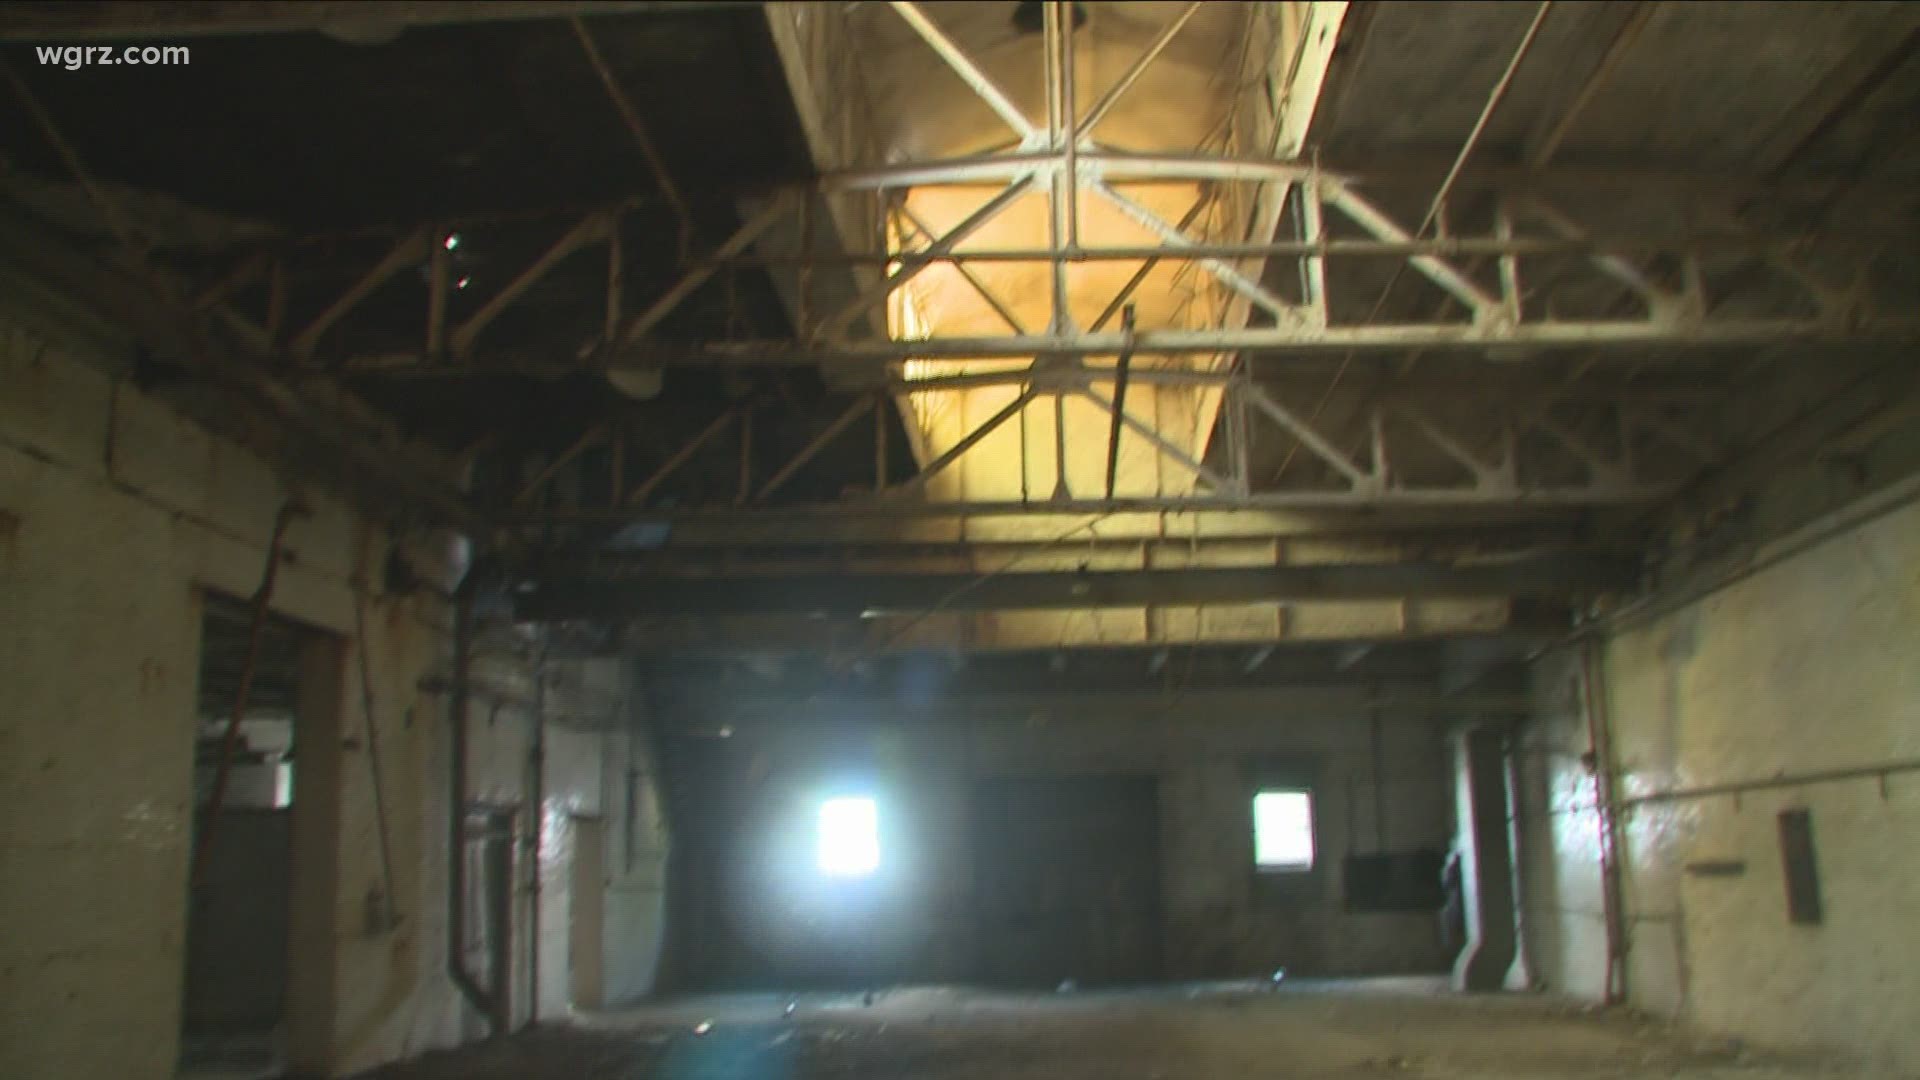 Unknown Stories: Buffalo Brewing Co. looking to give an old brewery new life